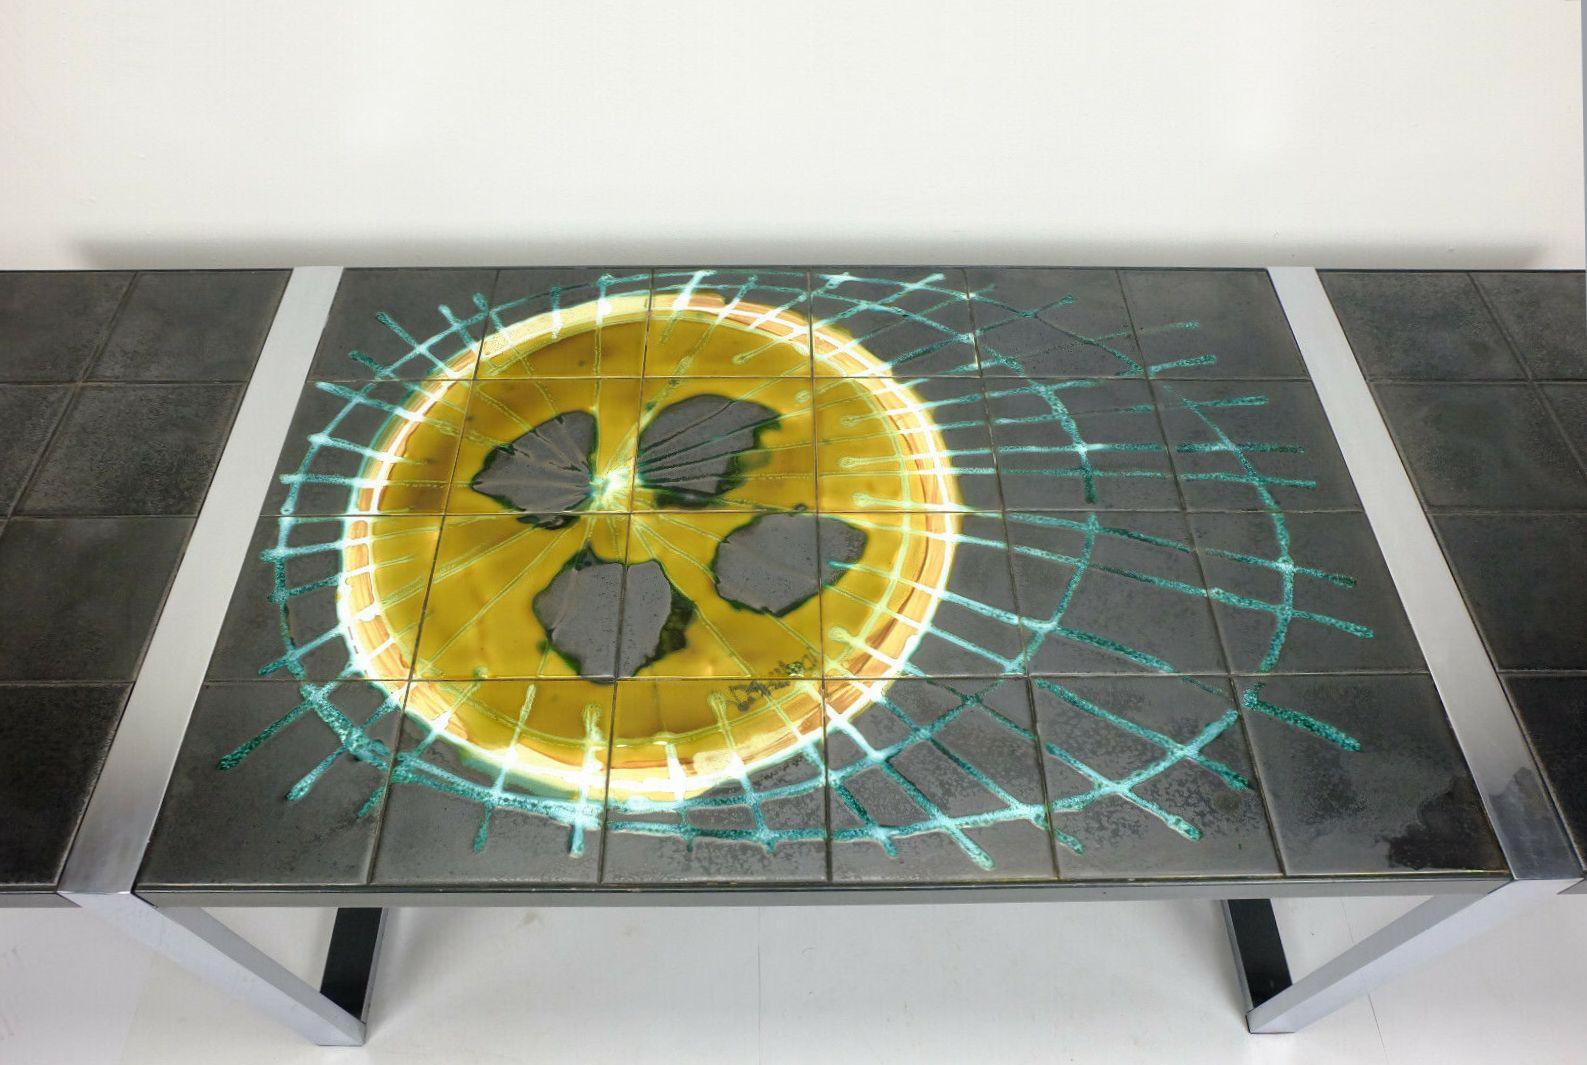 Fantastic and very beautiful late 1960s coffeetable by Belarti. Top ceramic tiles in dark grey with a slight metallic shine, motif in ochre, white and turquoise, embedded in a metal rim. The base is made of chrome plated metal.

Very good